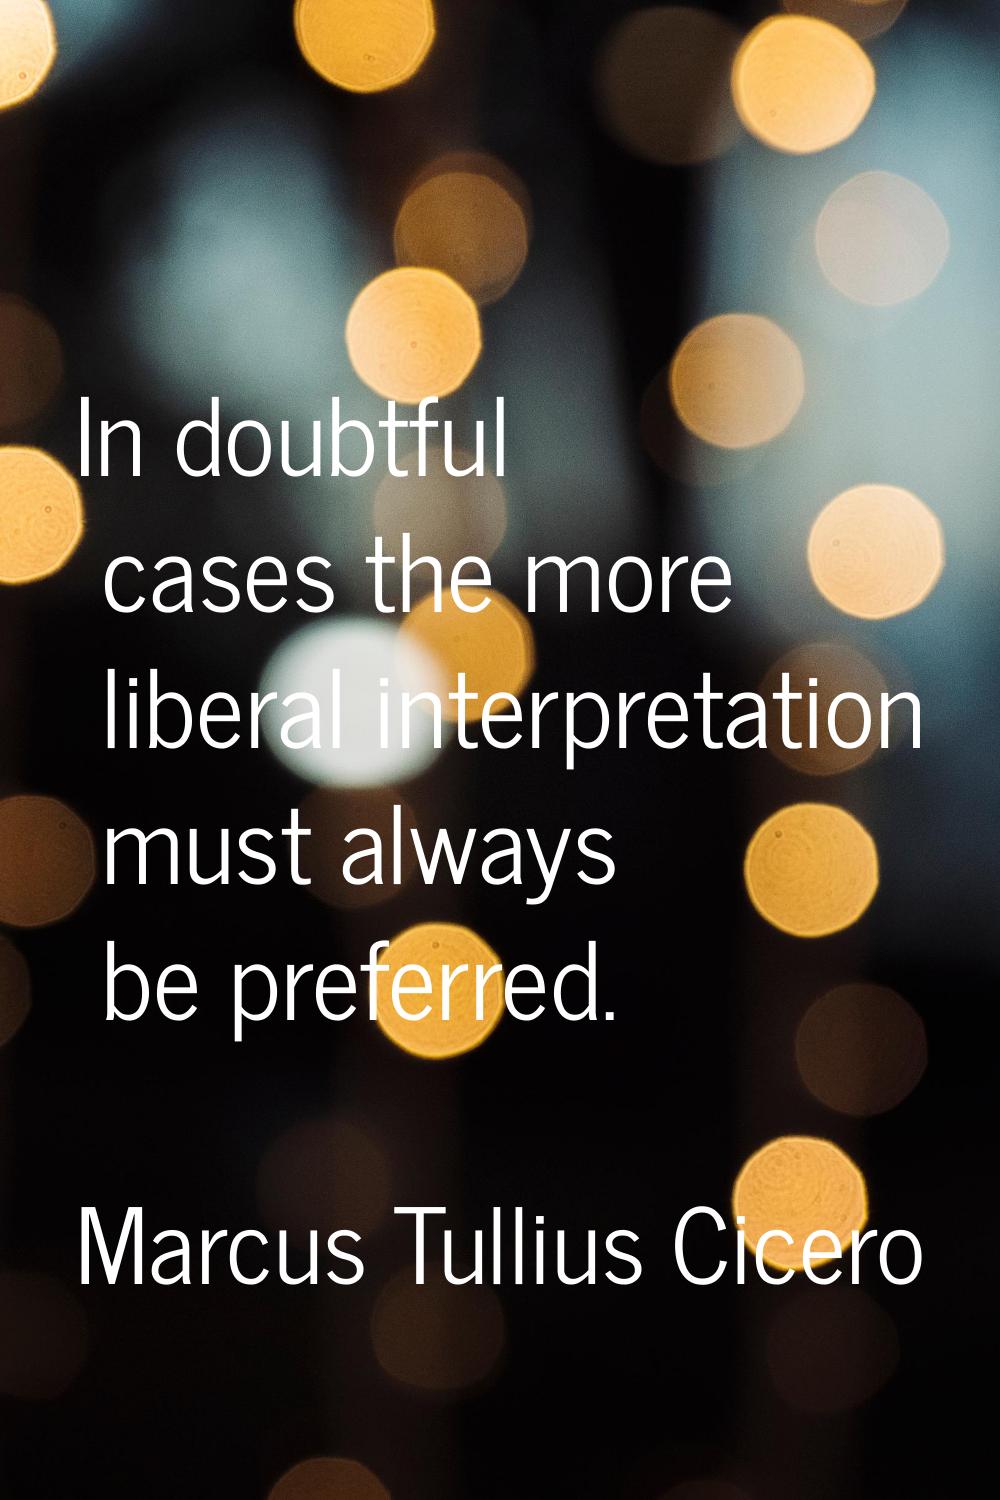 In doubtful cases the more liberal interpretation must always be preferred.